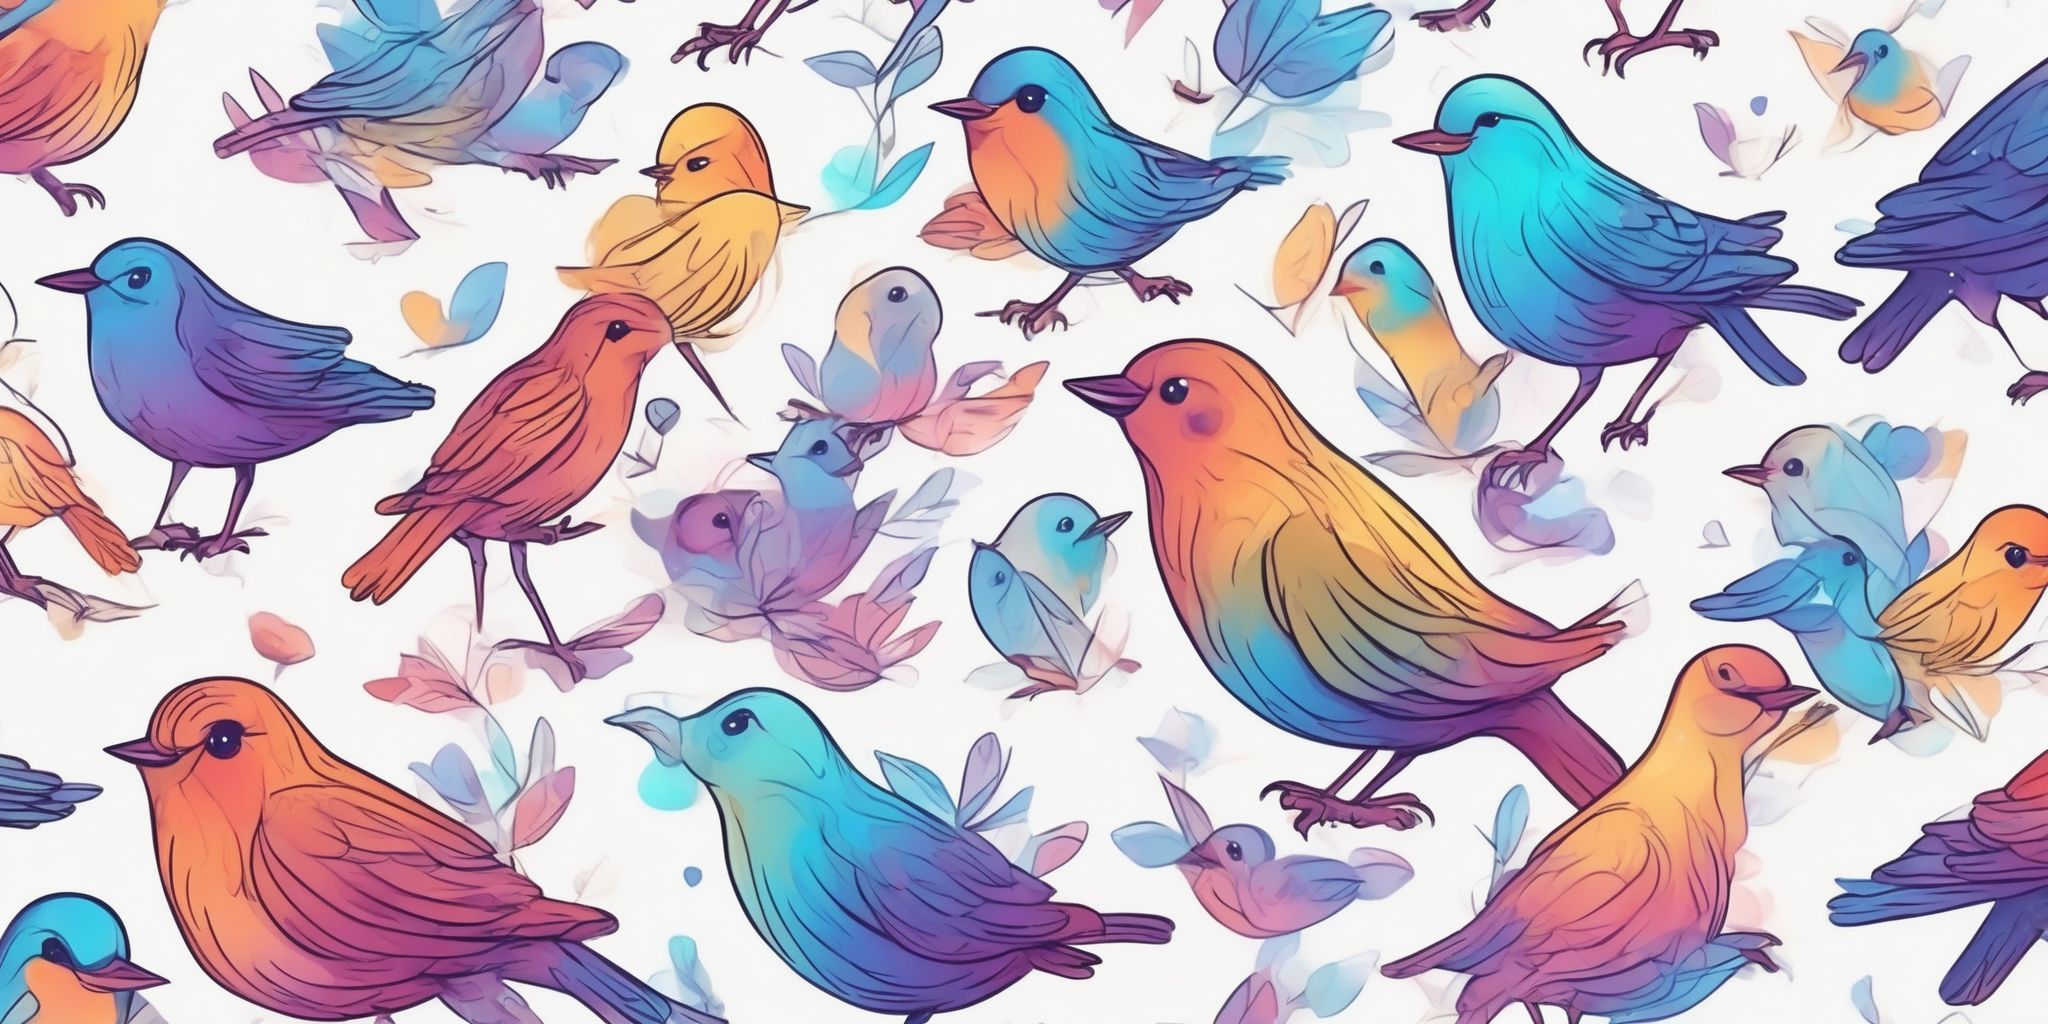 Tweets in illustration style with gradients and white background